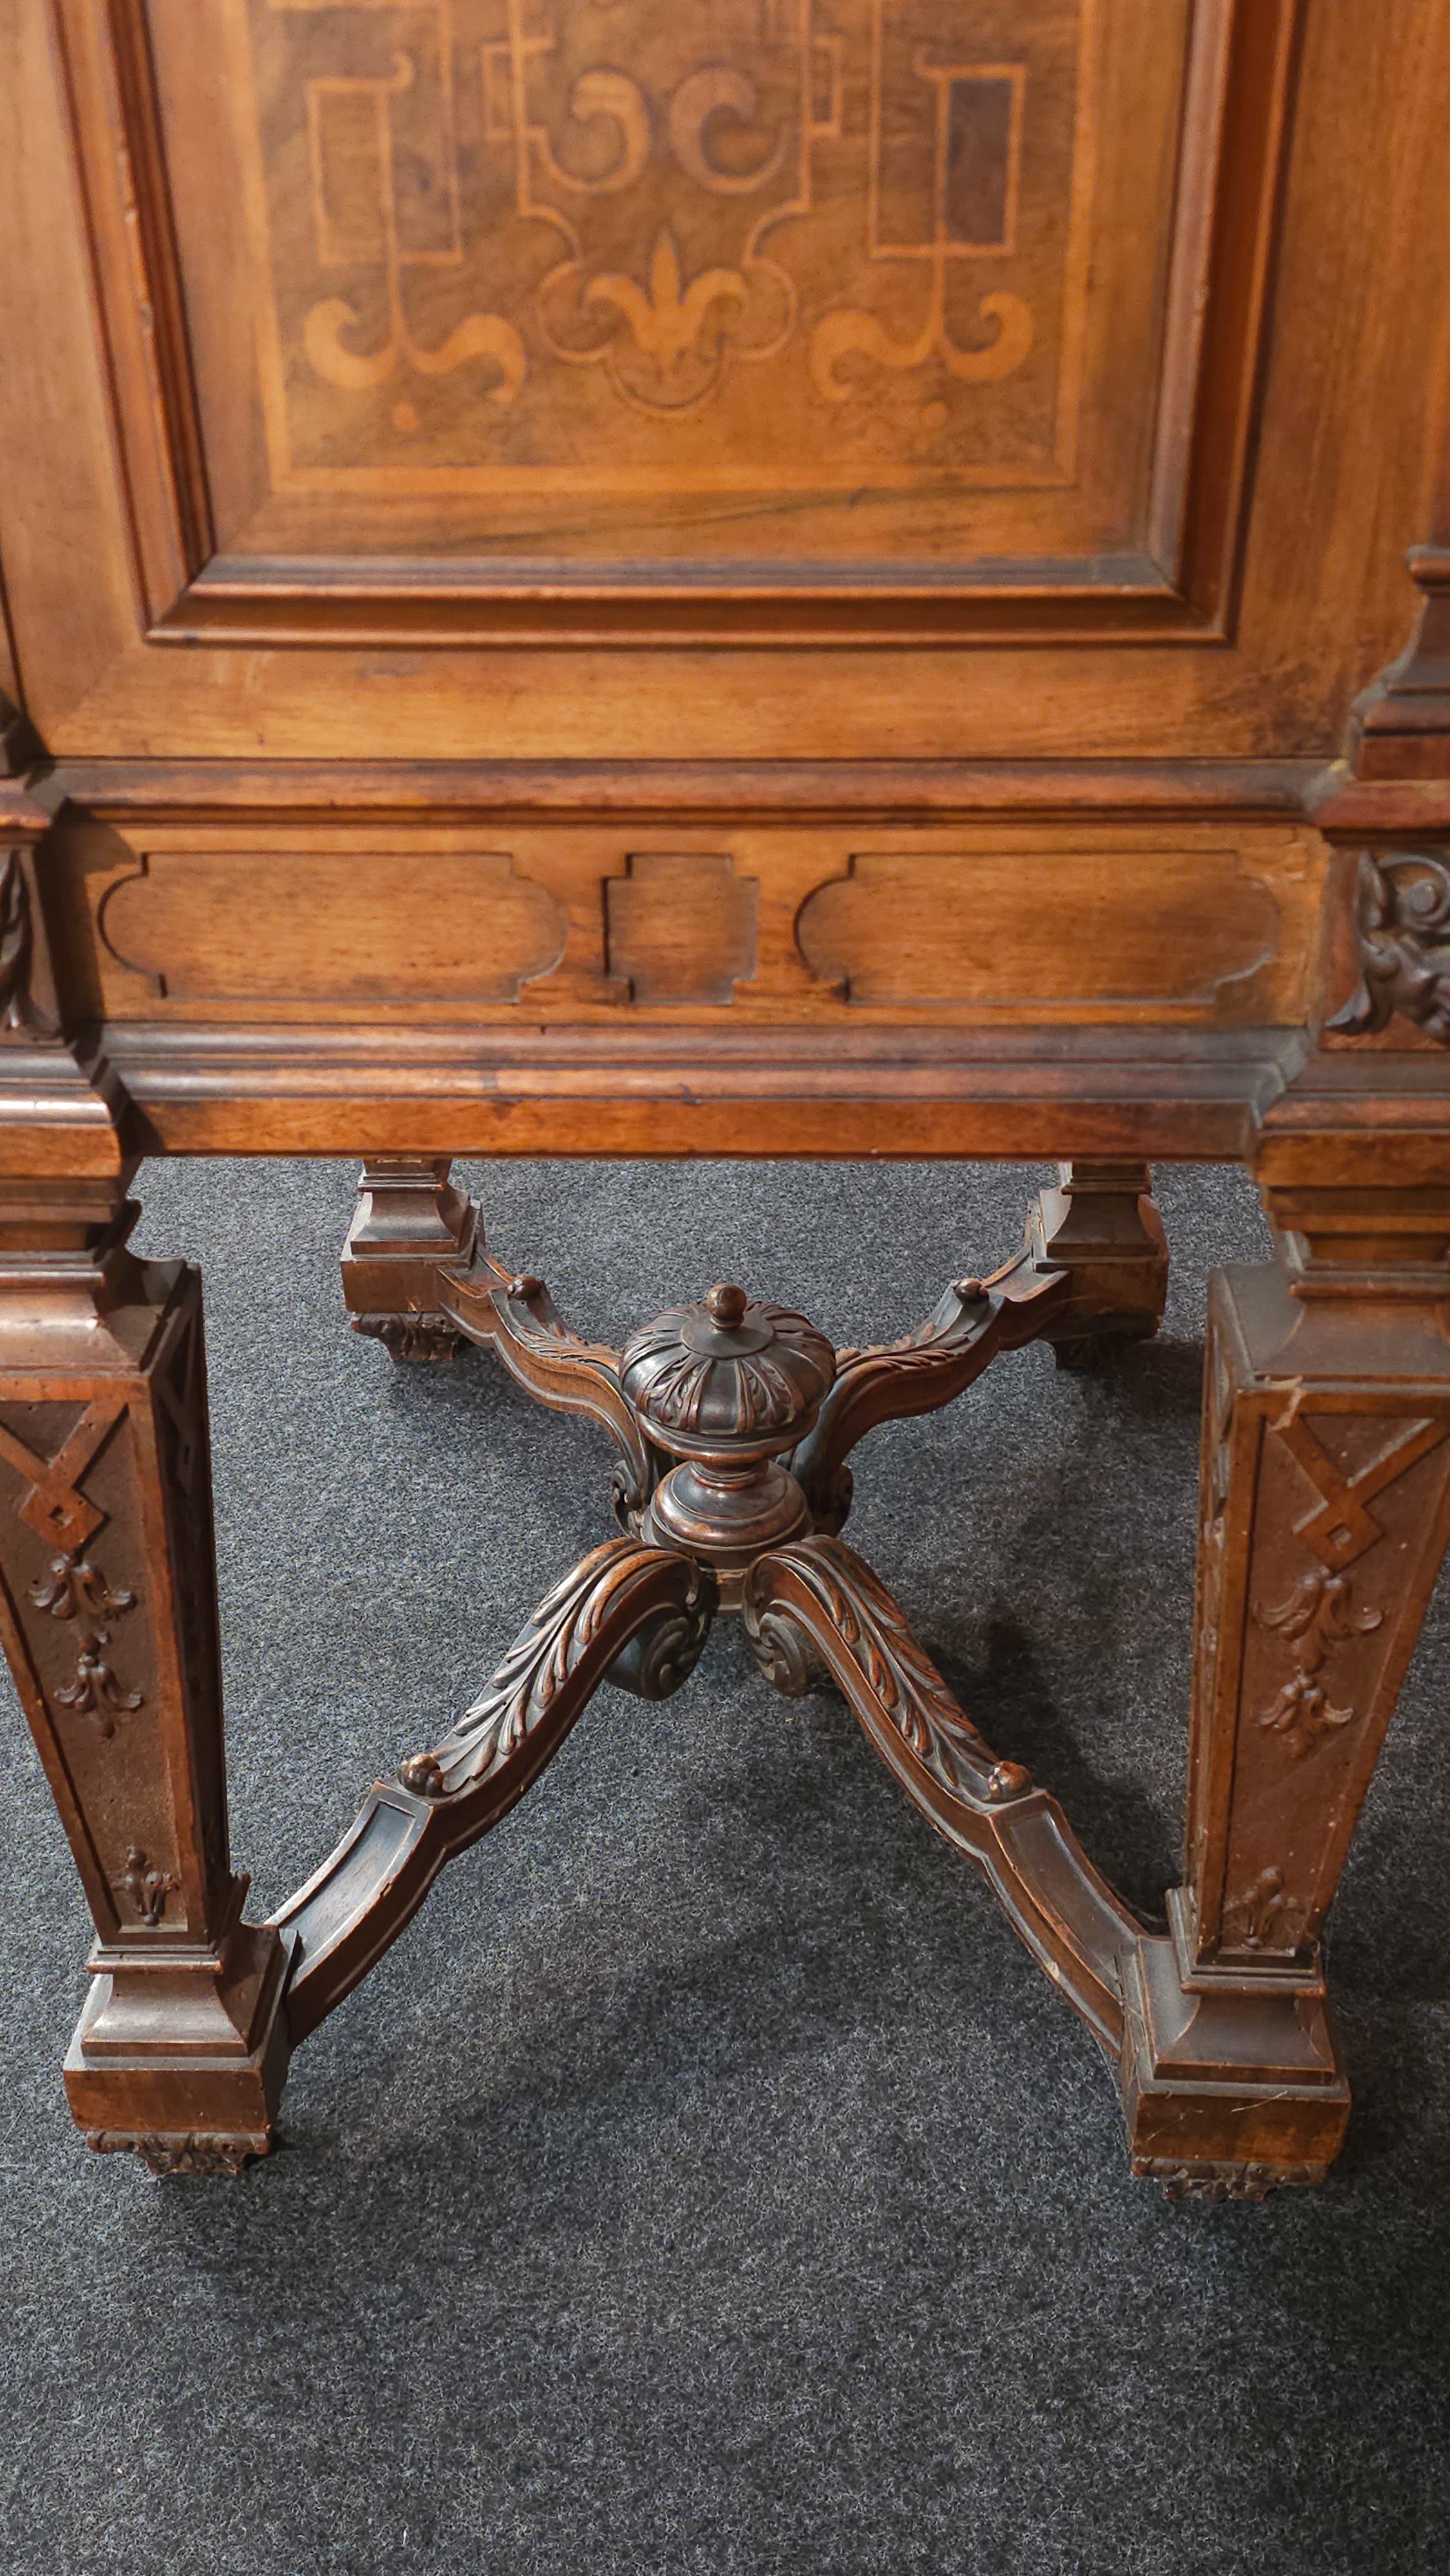 German Lectern Podium with Inlays, 1850 circa For Sale 13